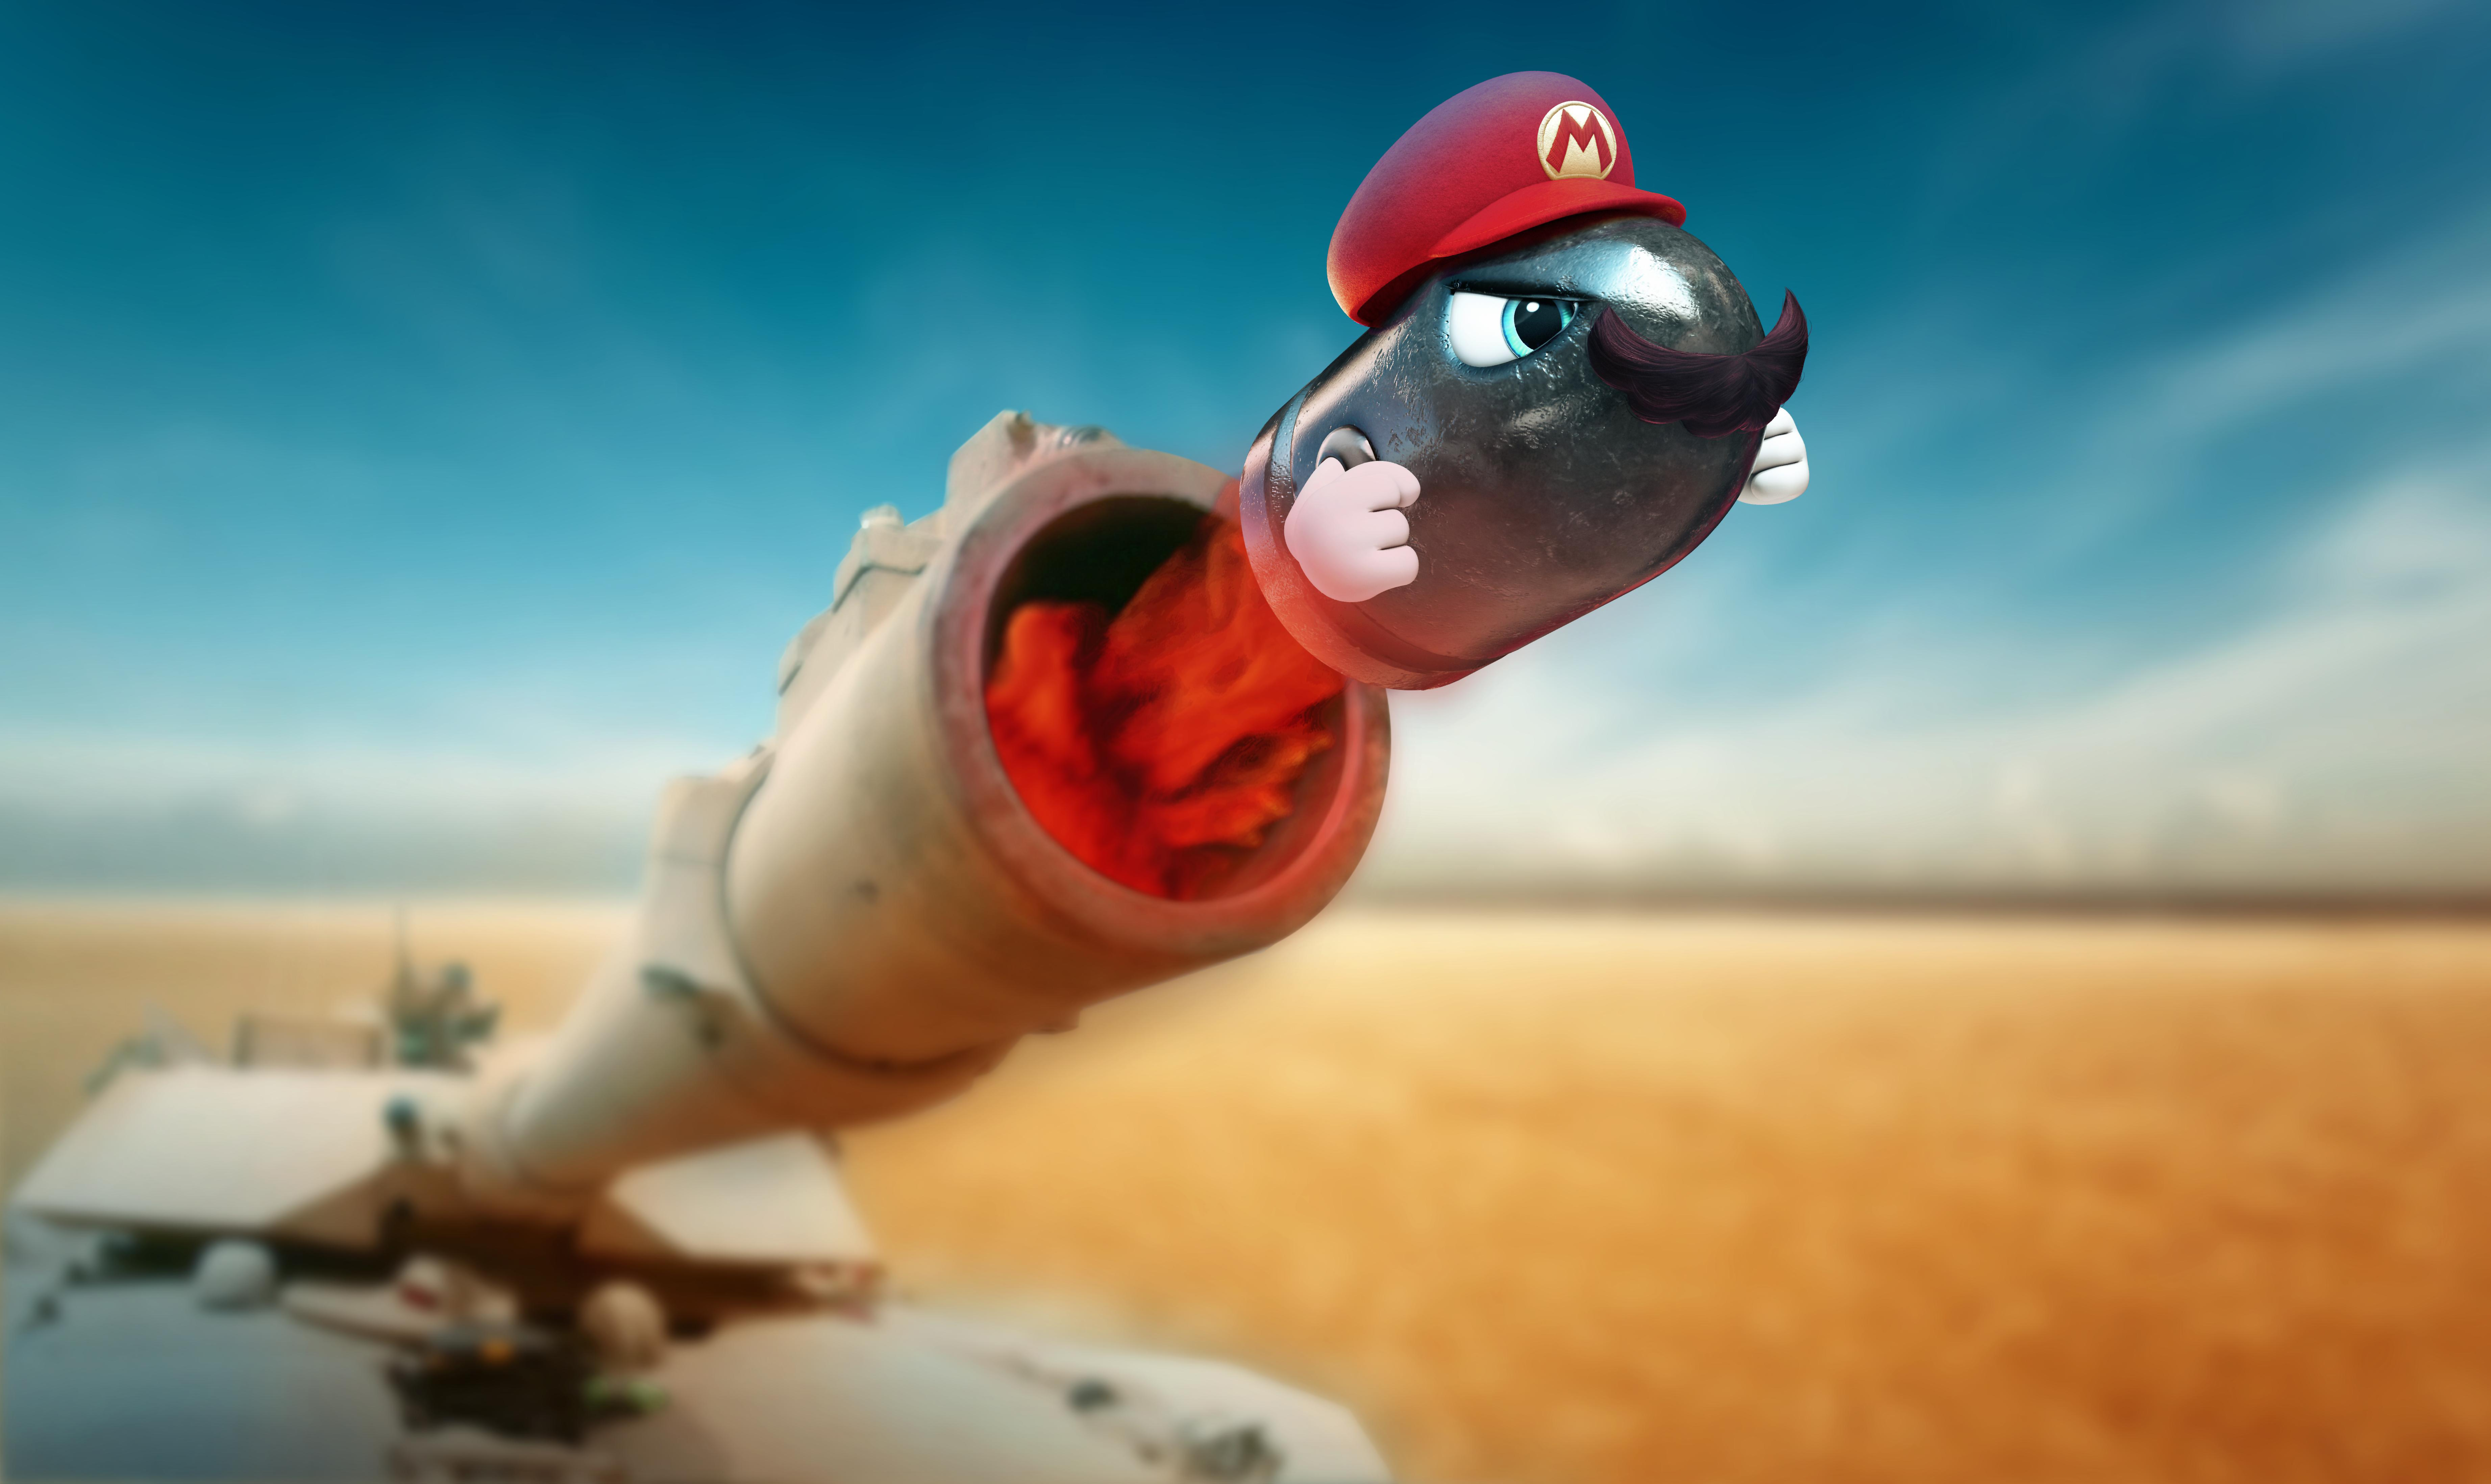 Super Mario Odyssey Wallpapers Pictures Images HD Wallpapers Download Free Map Images Wallpaper [wallpaper684.blogspot.com]